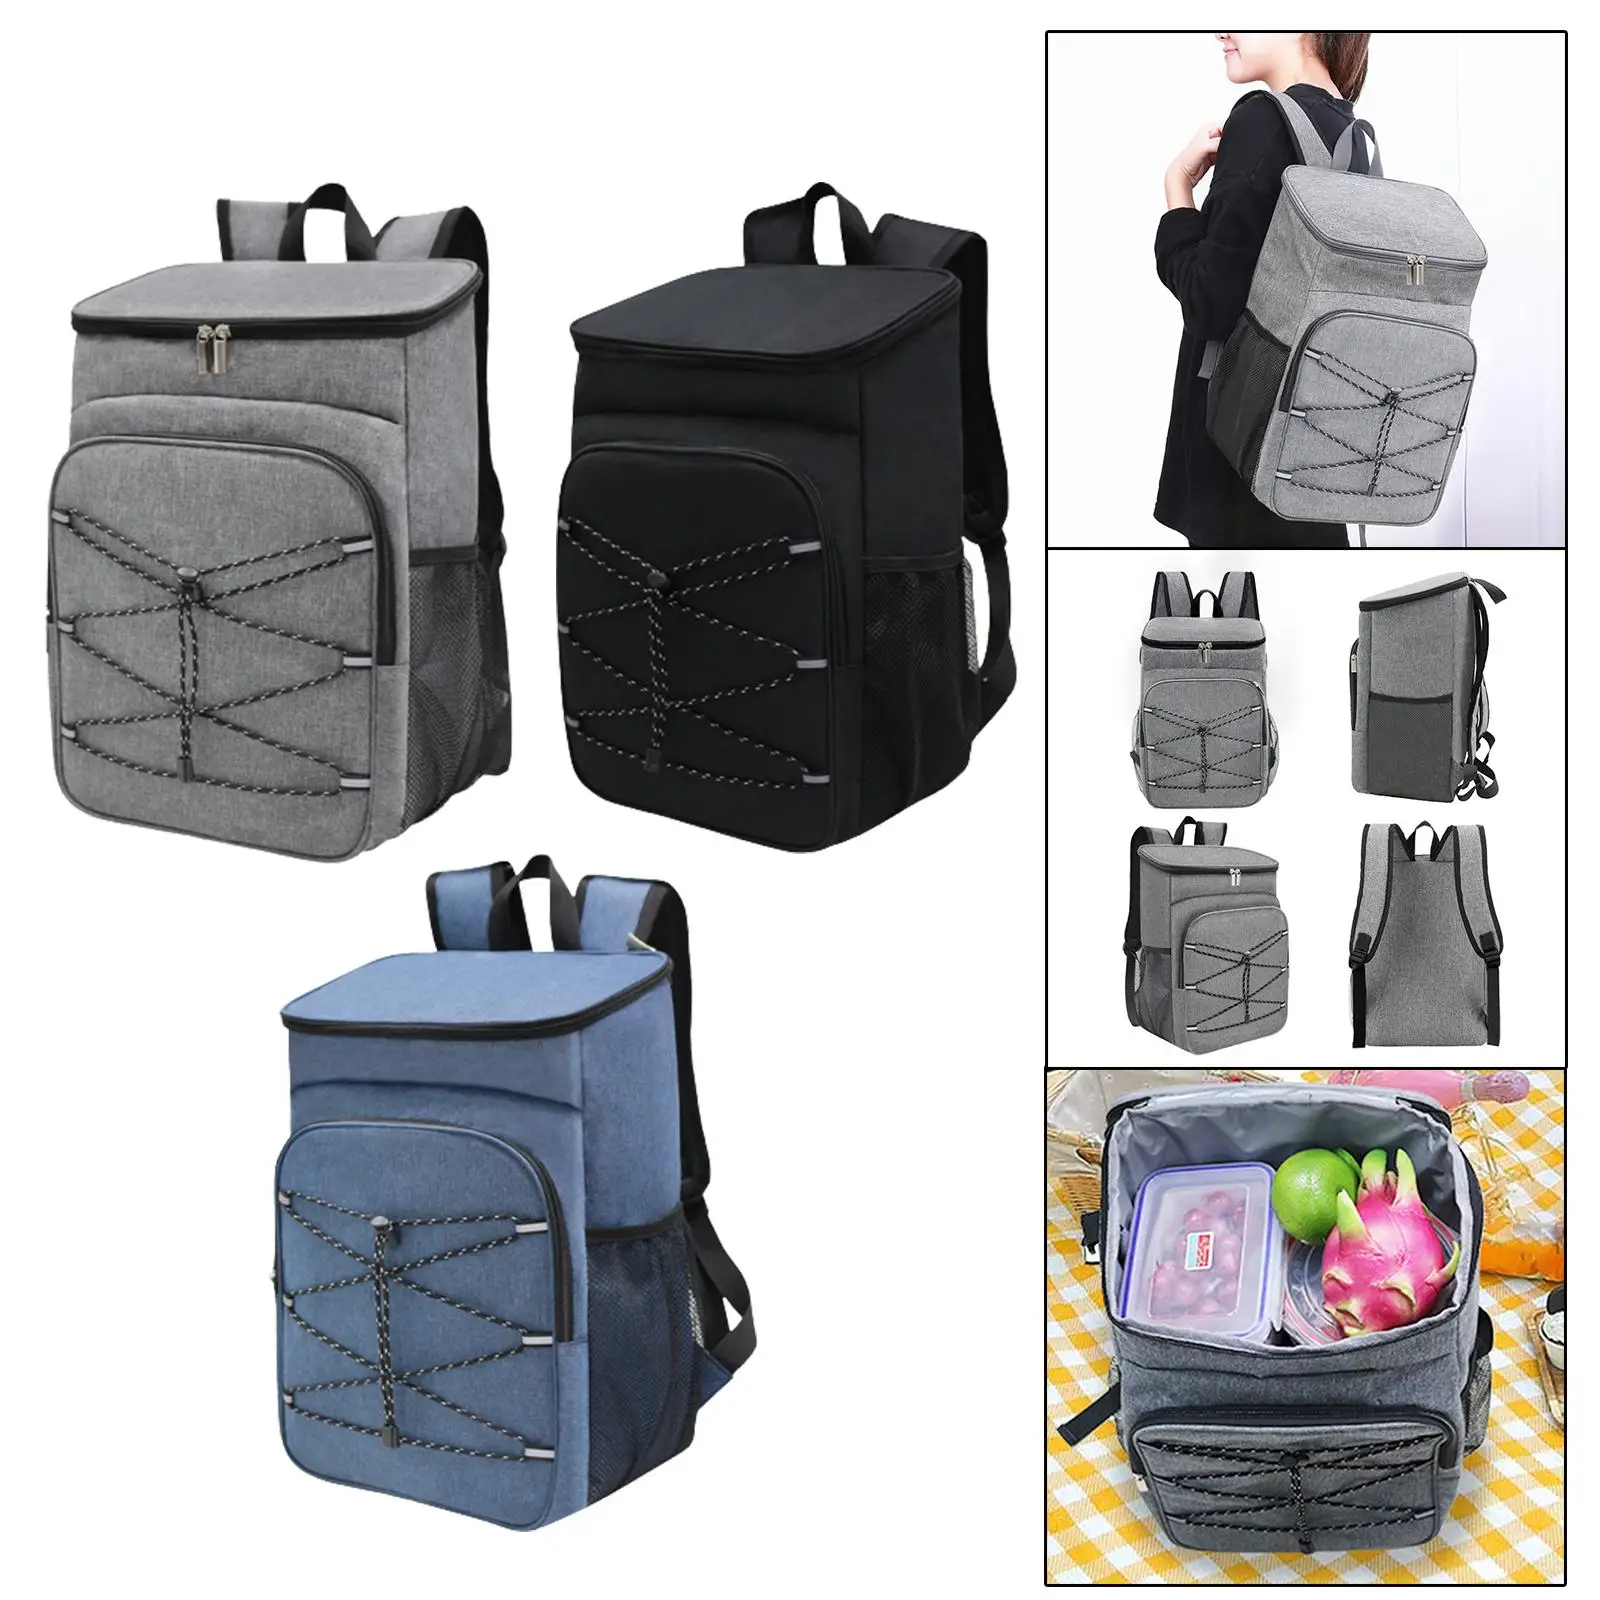 Insulated Cooler Backpack Waterproof Cooler Bag Waterproof Lunch Backpack Beach Cooler Beer Bag for Work Lunch Hiking Travel